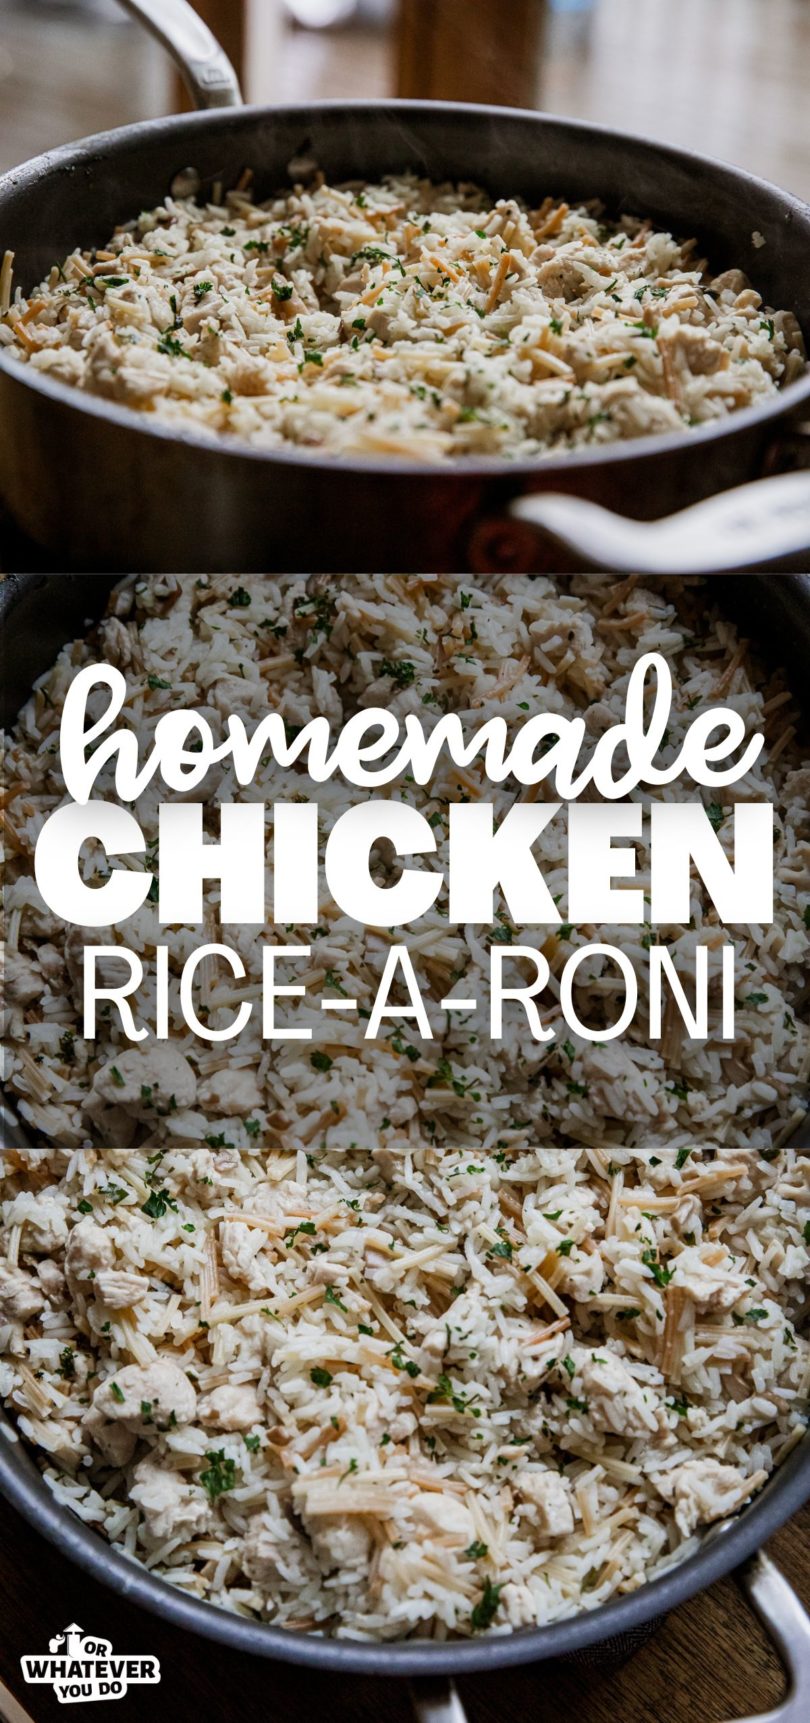 Chicken Rice-A-Roni